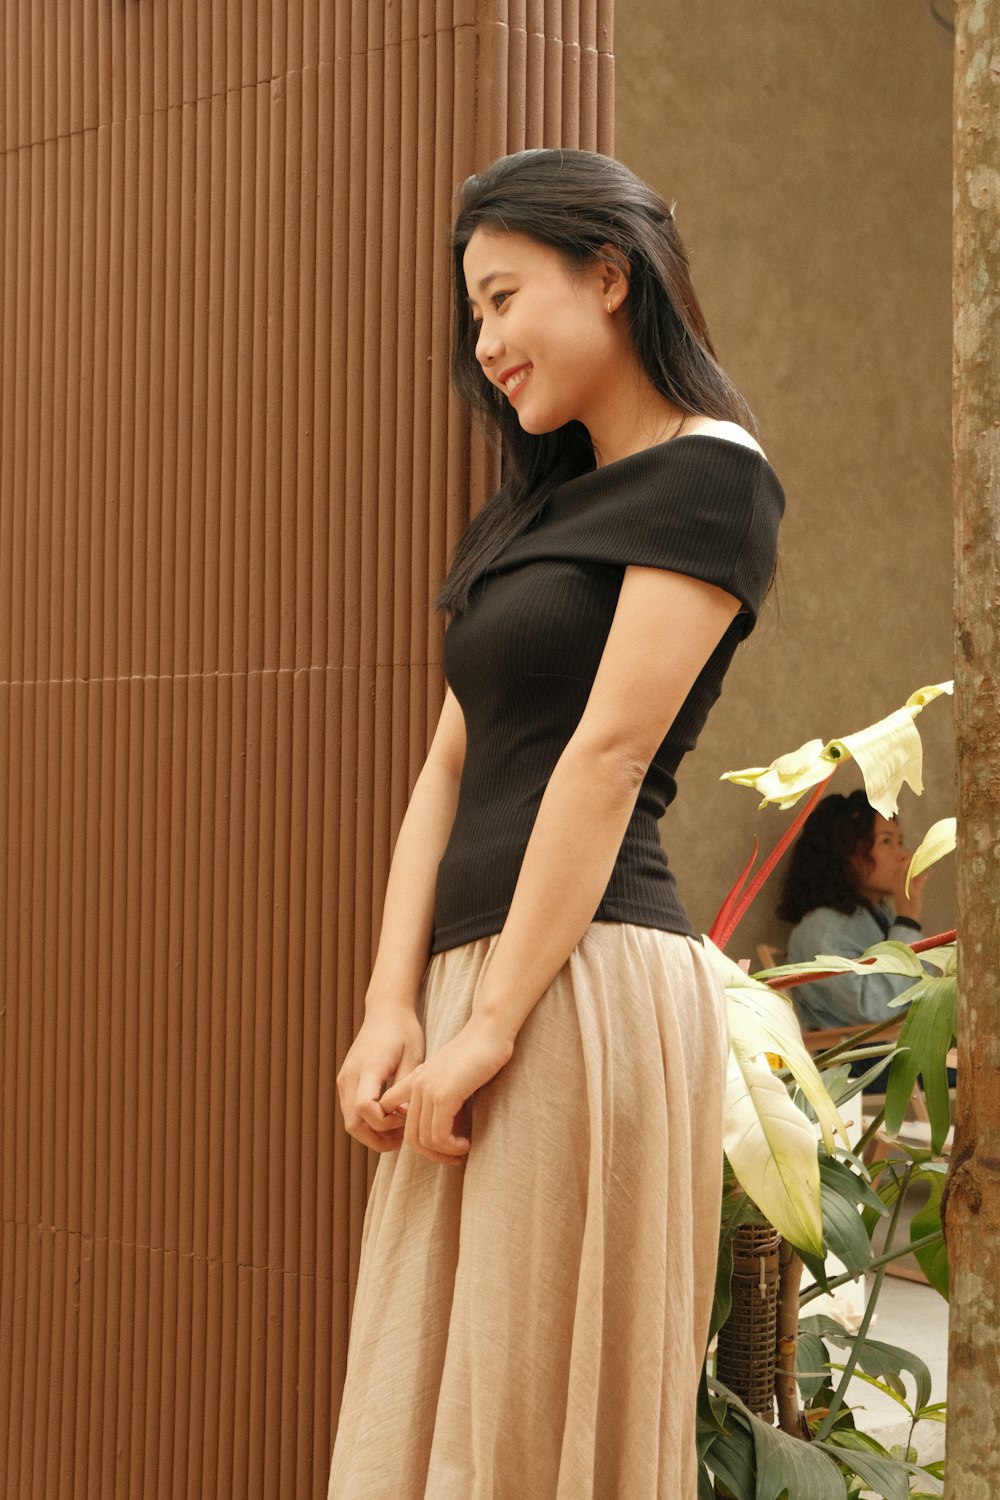 a woman in a black top and tan skirt